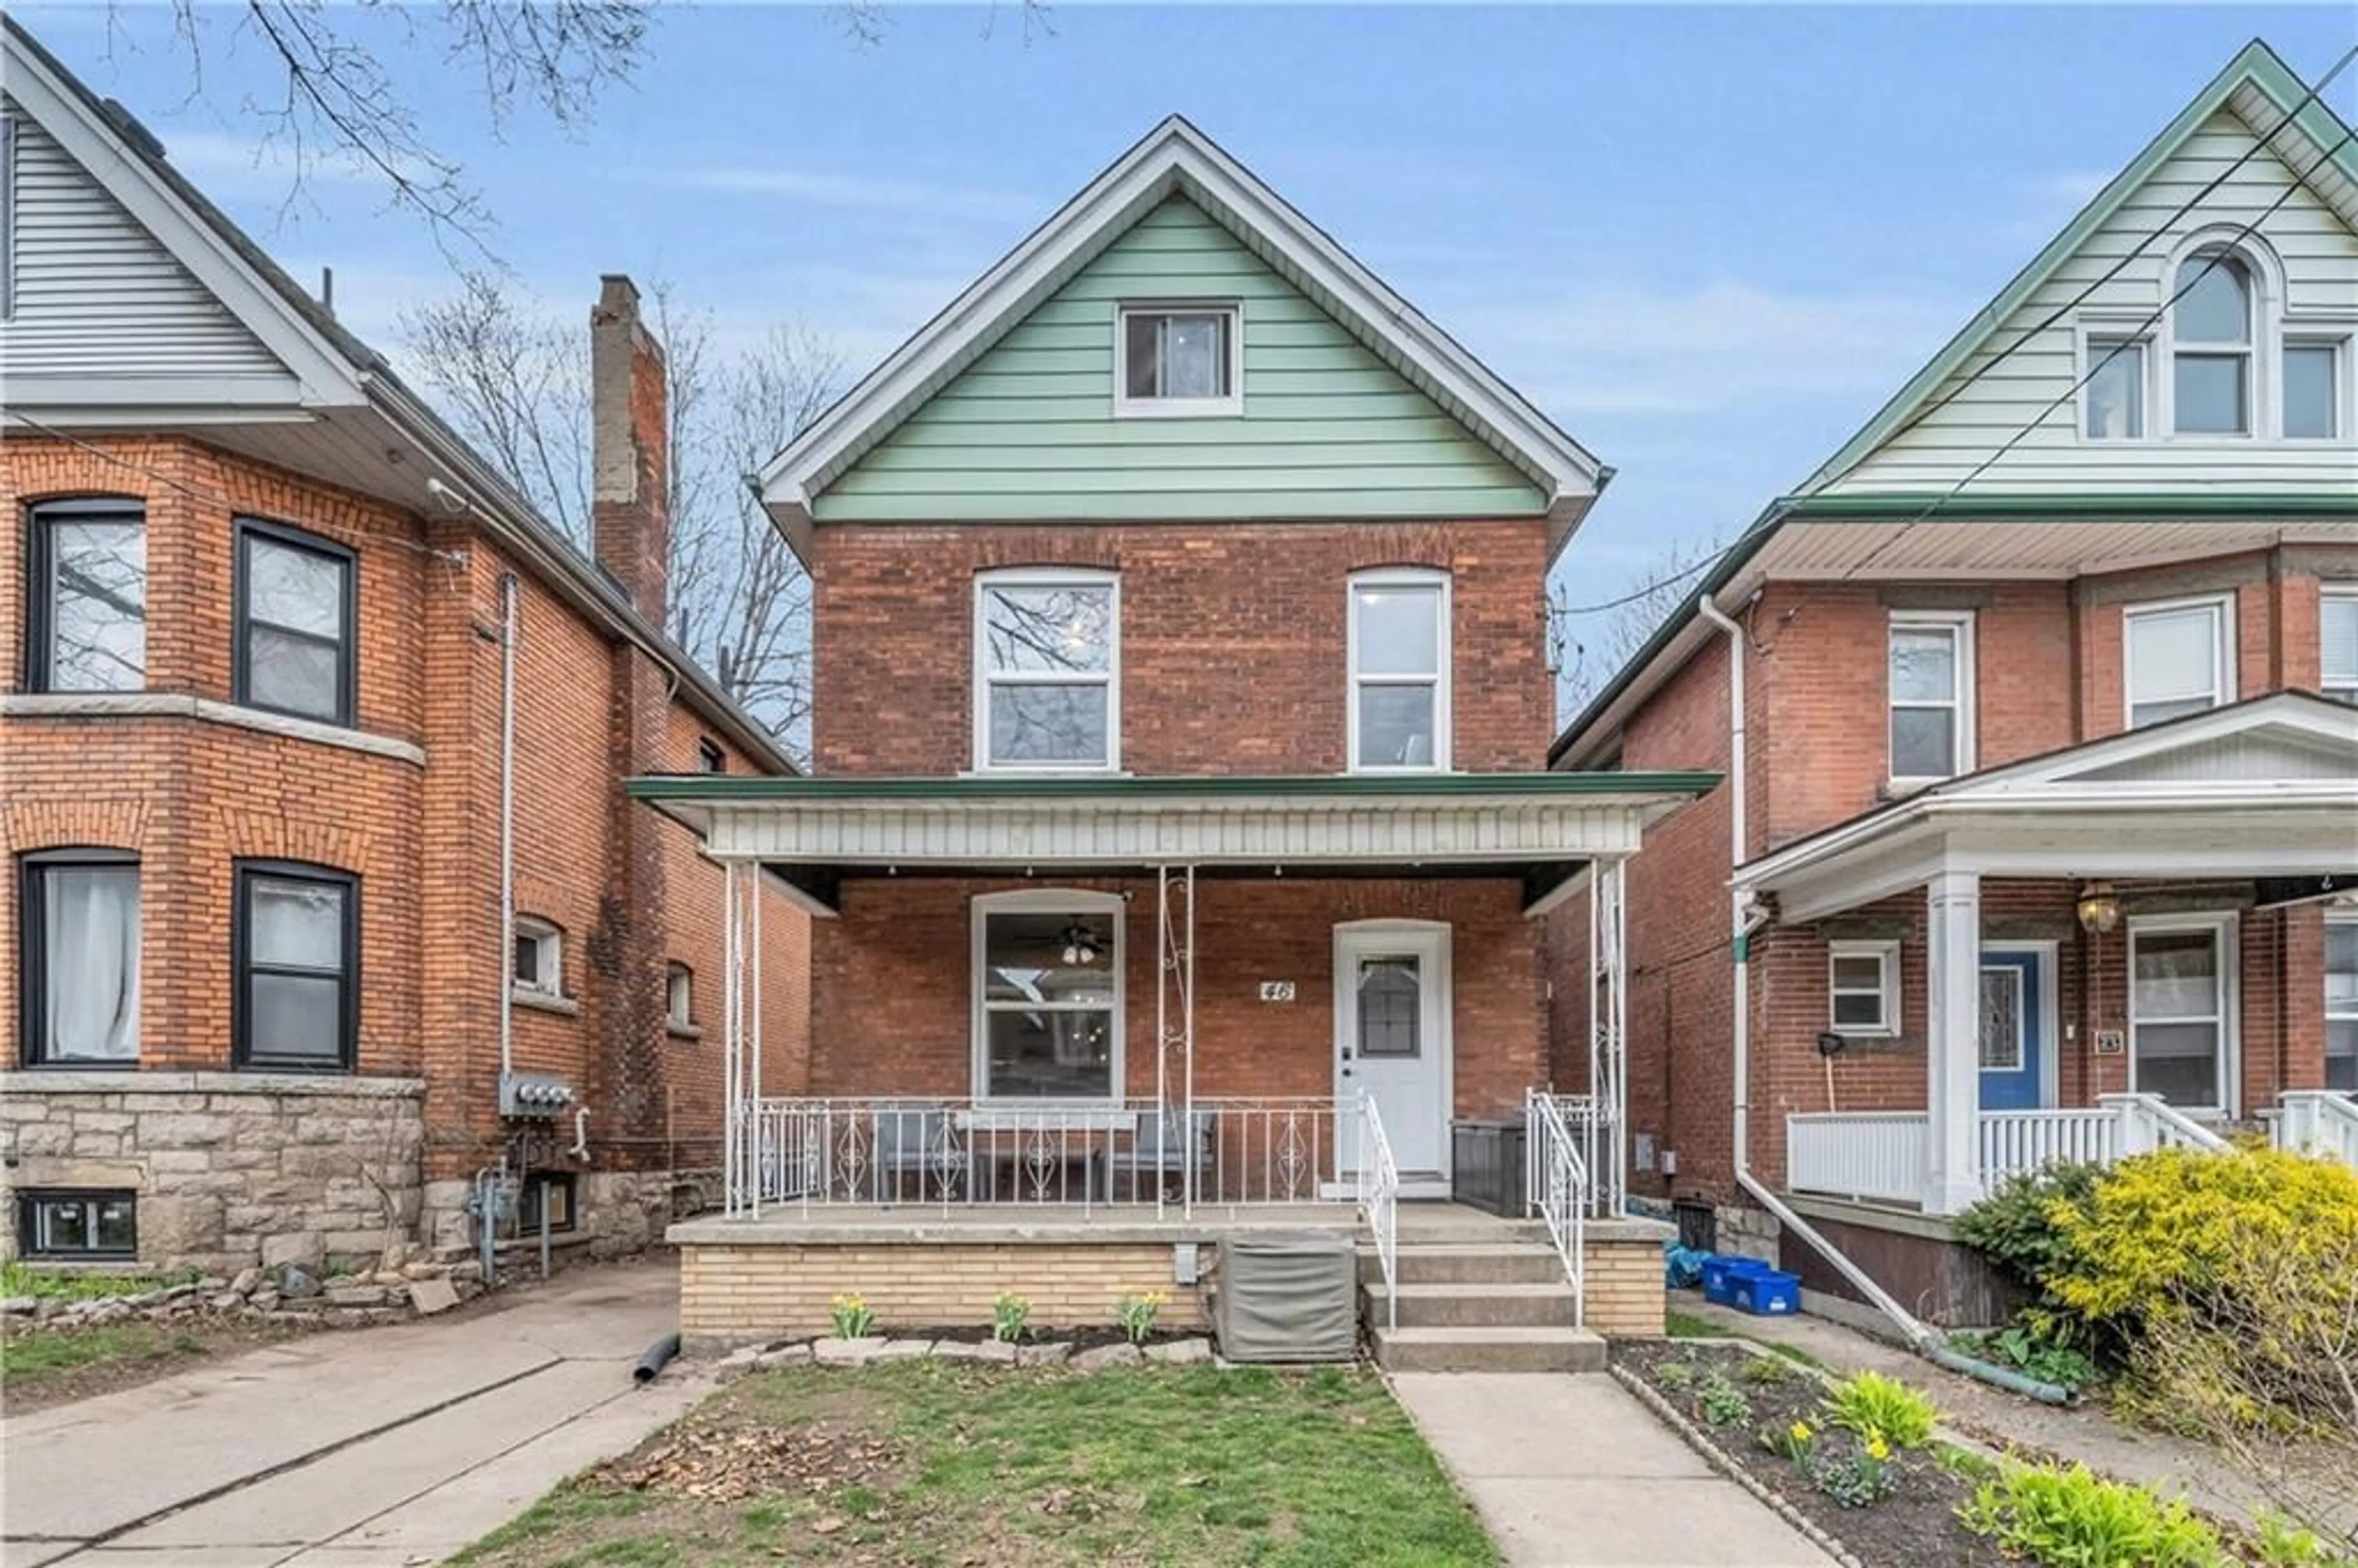 Home with brick exterior material for 46 Garfield Ave, Hamilton Ontario L8M 2S1